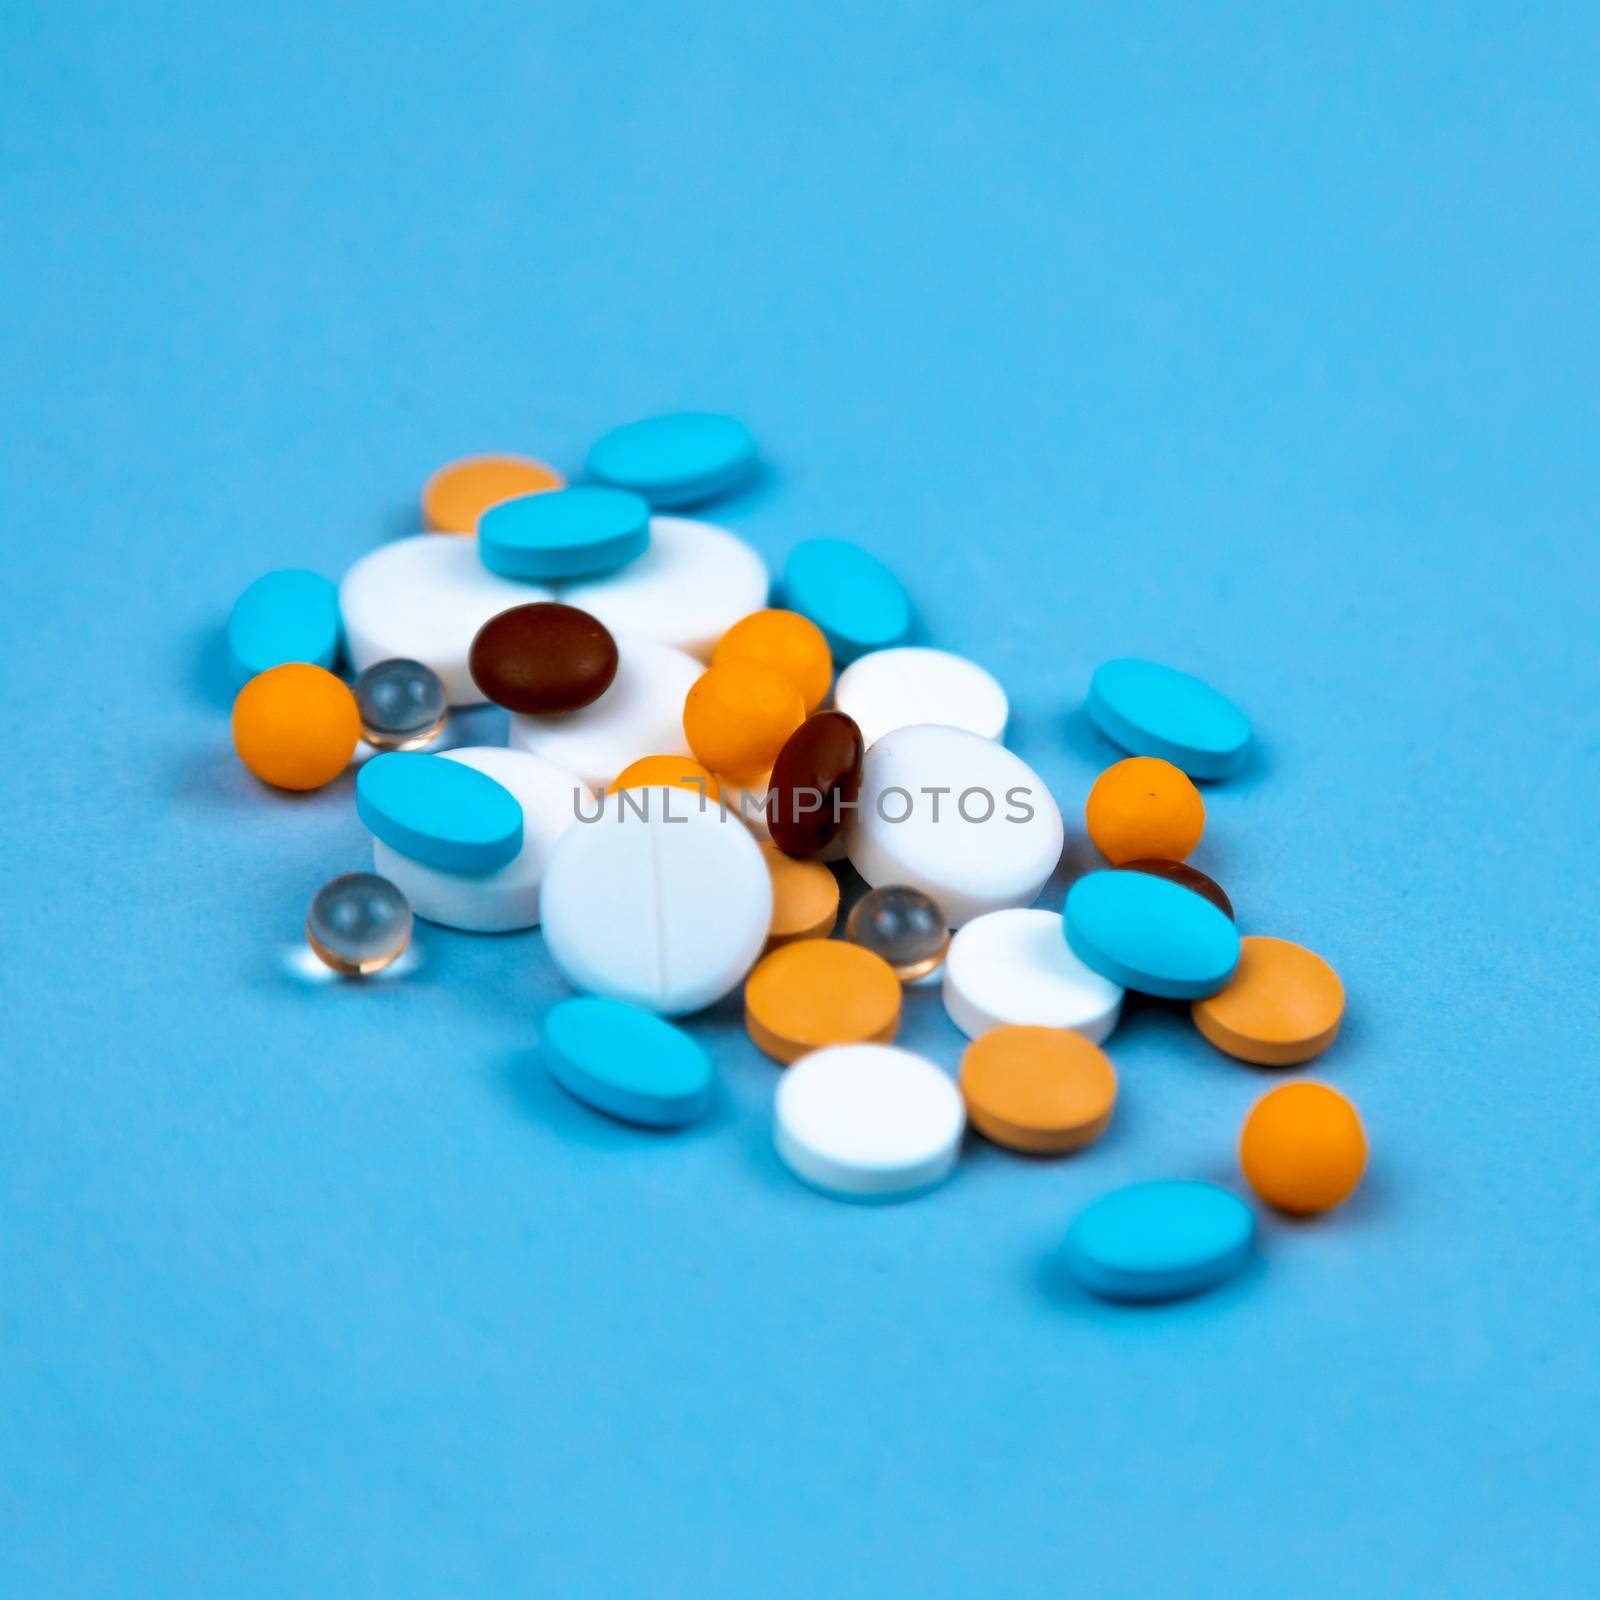 Multi-colored pills on a blue background close-up, with copy space for text.